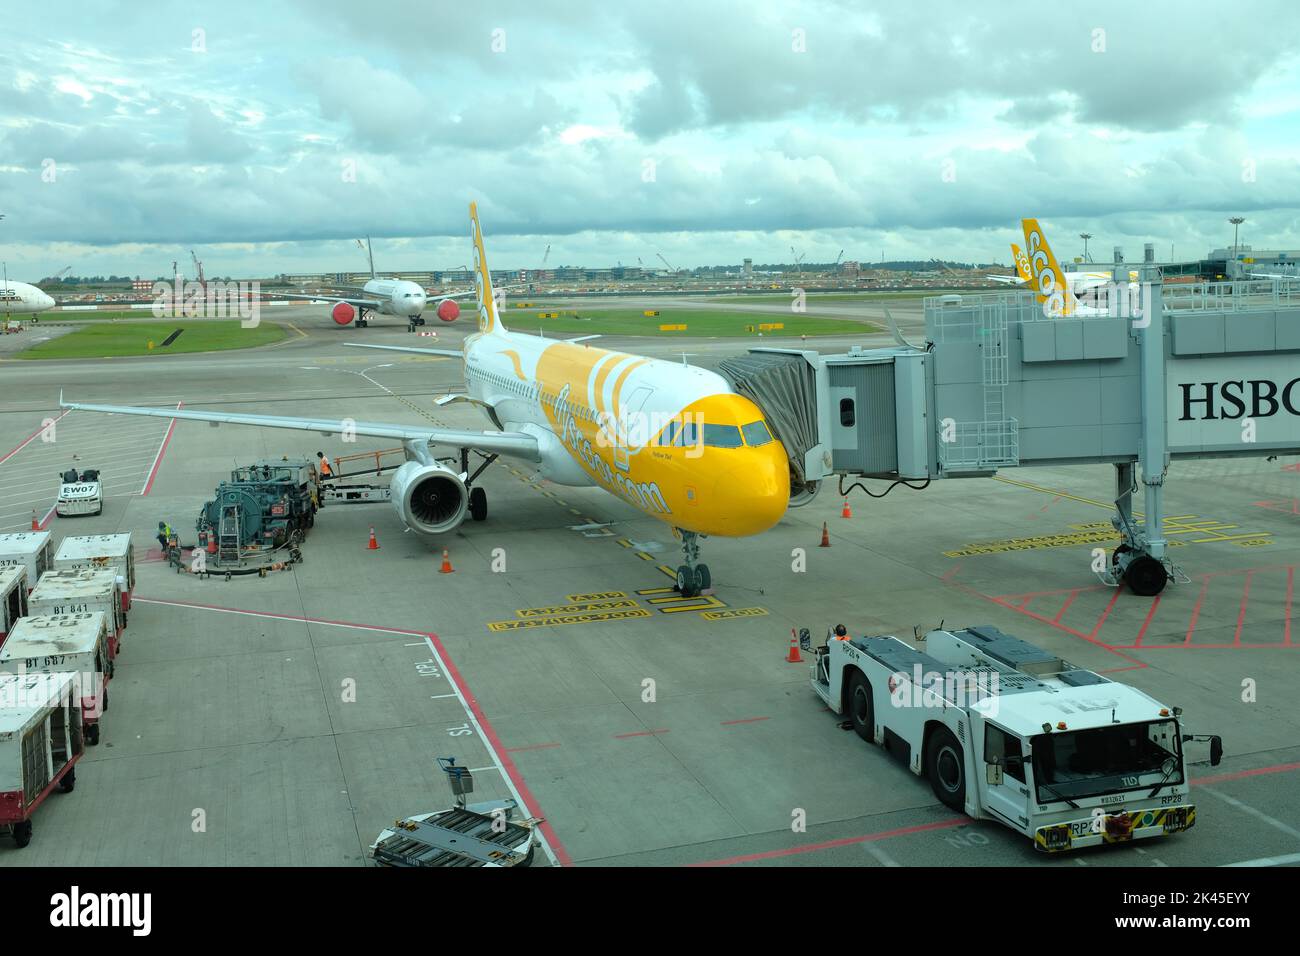 A Scoot aircraft on the gate at Changi airport, Singapore Stock Photo